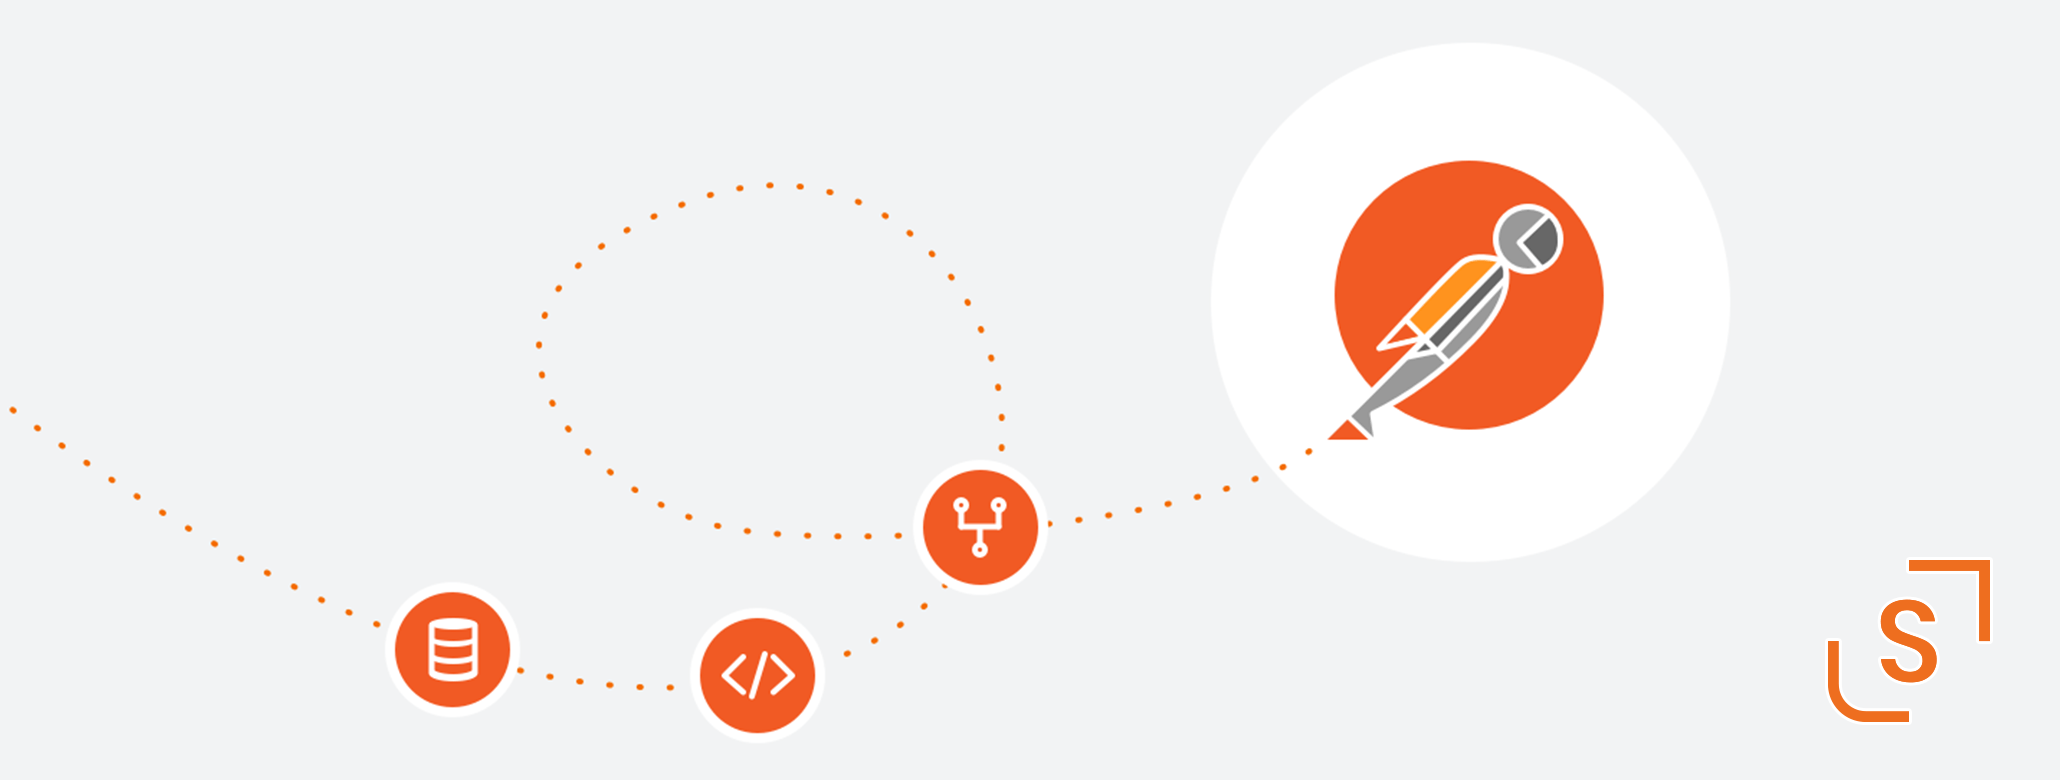 Postman Logo - 3 Ways to use Postman for Better QA Results | SHOCKOE